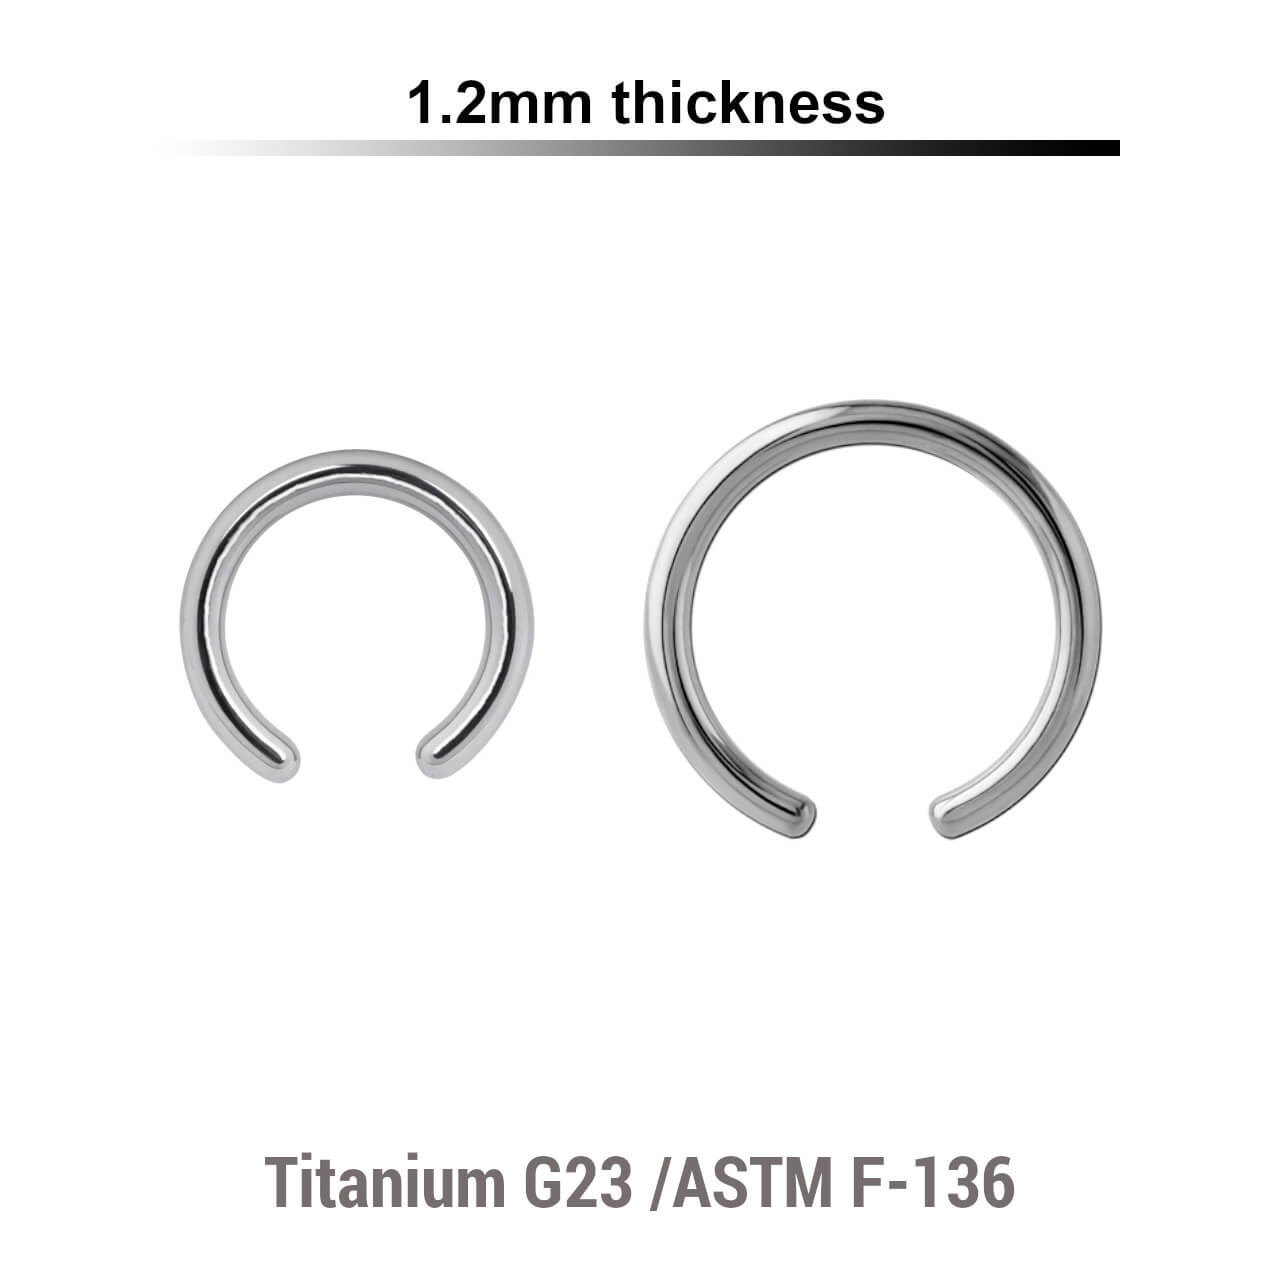 TYBC12N Piercing studio supplies: Pack of 25 pcs. ball closure rings posts in high polished titanium G23, thickness 1.2mm